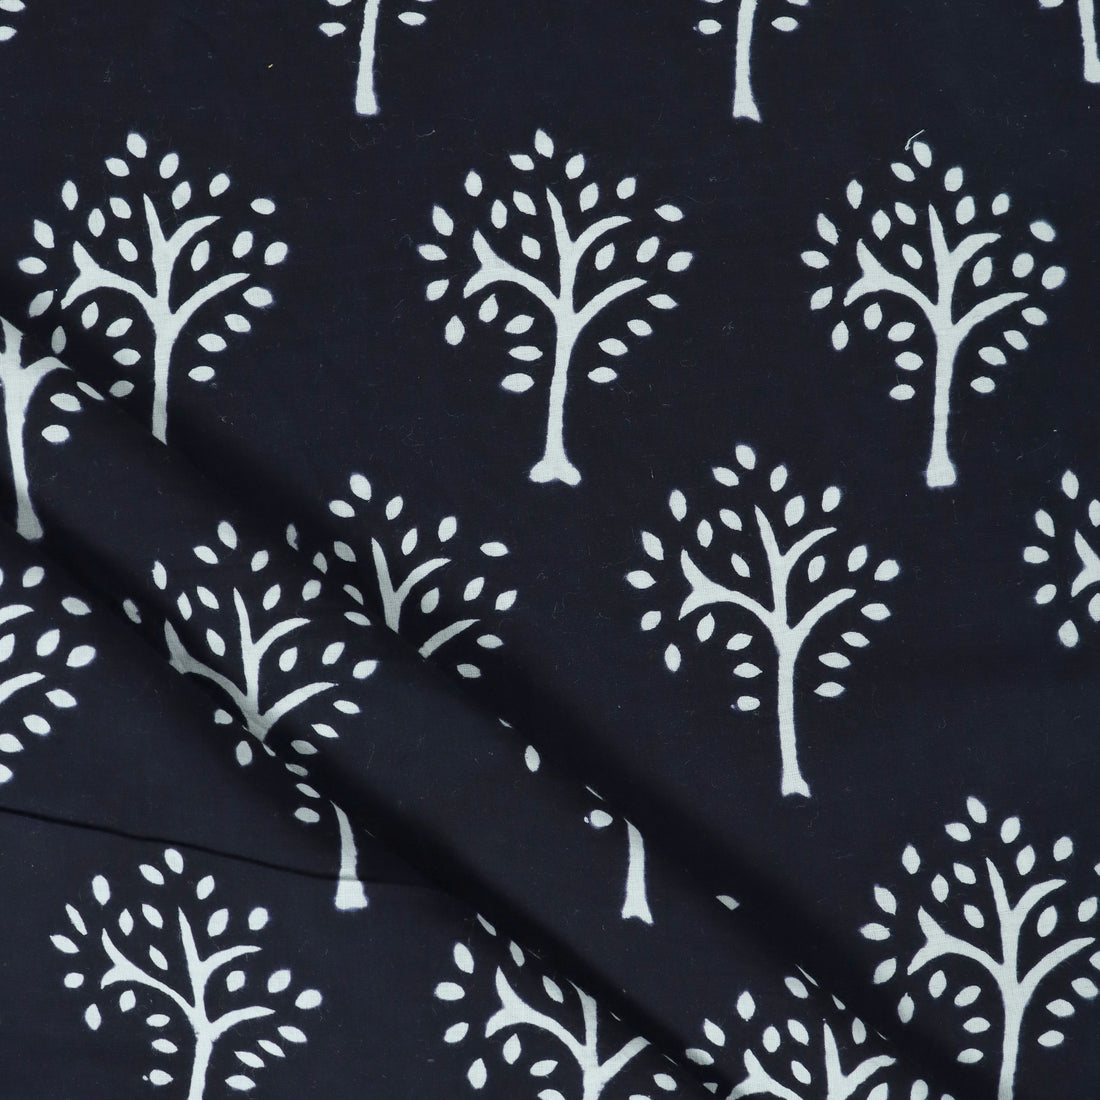 Floral Printed Black And White Cotton Fabric Material Online